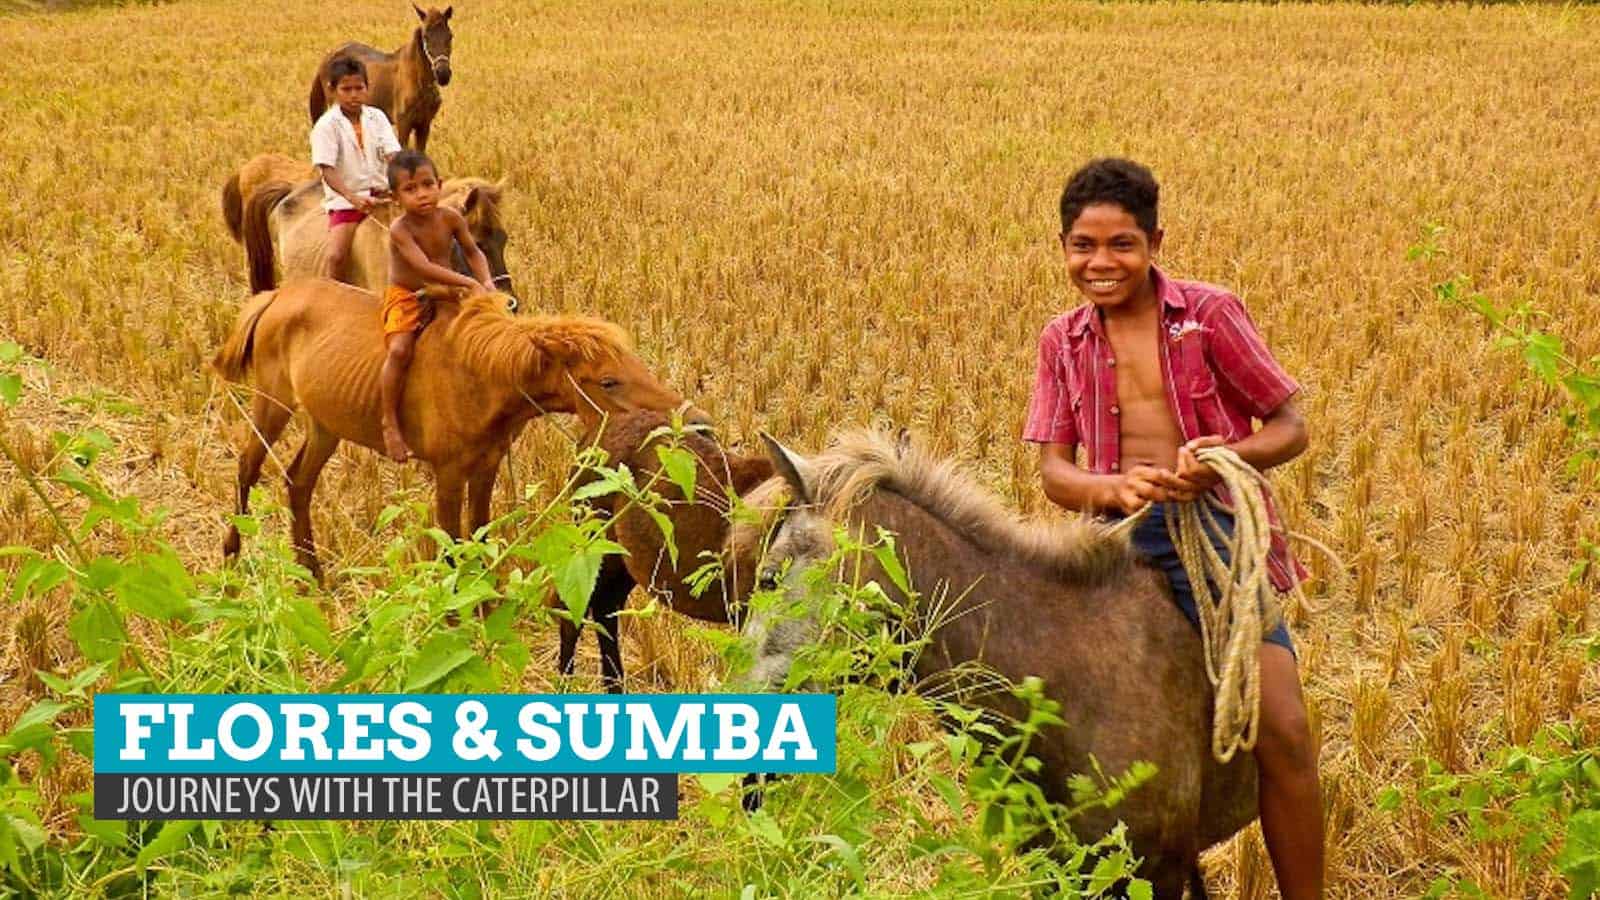 Flores and Sumba, Indonesia: Excerpt from ‘Journeys with the Caterpillar’